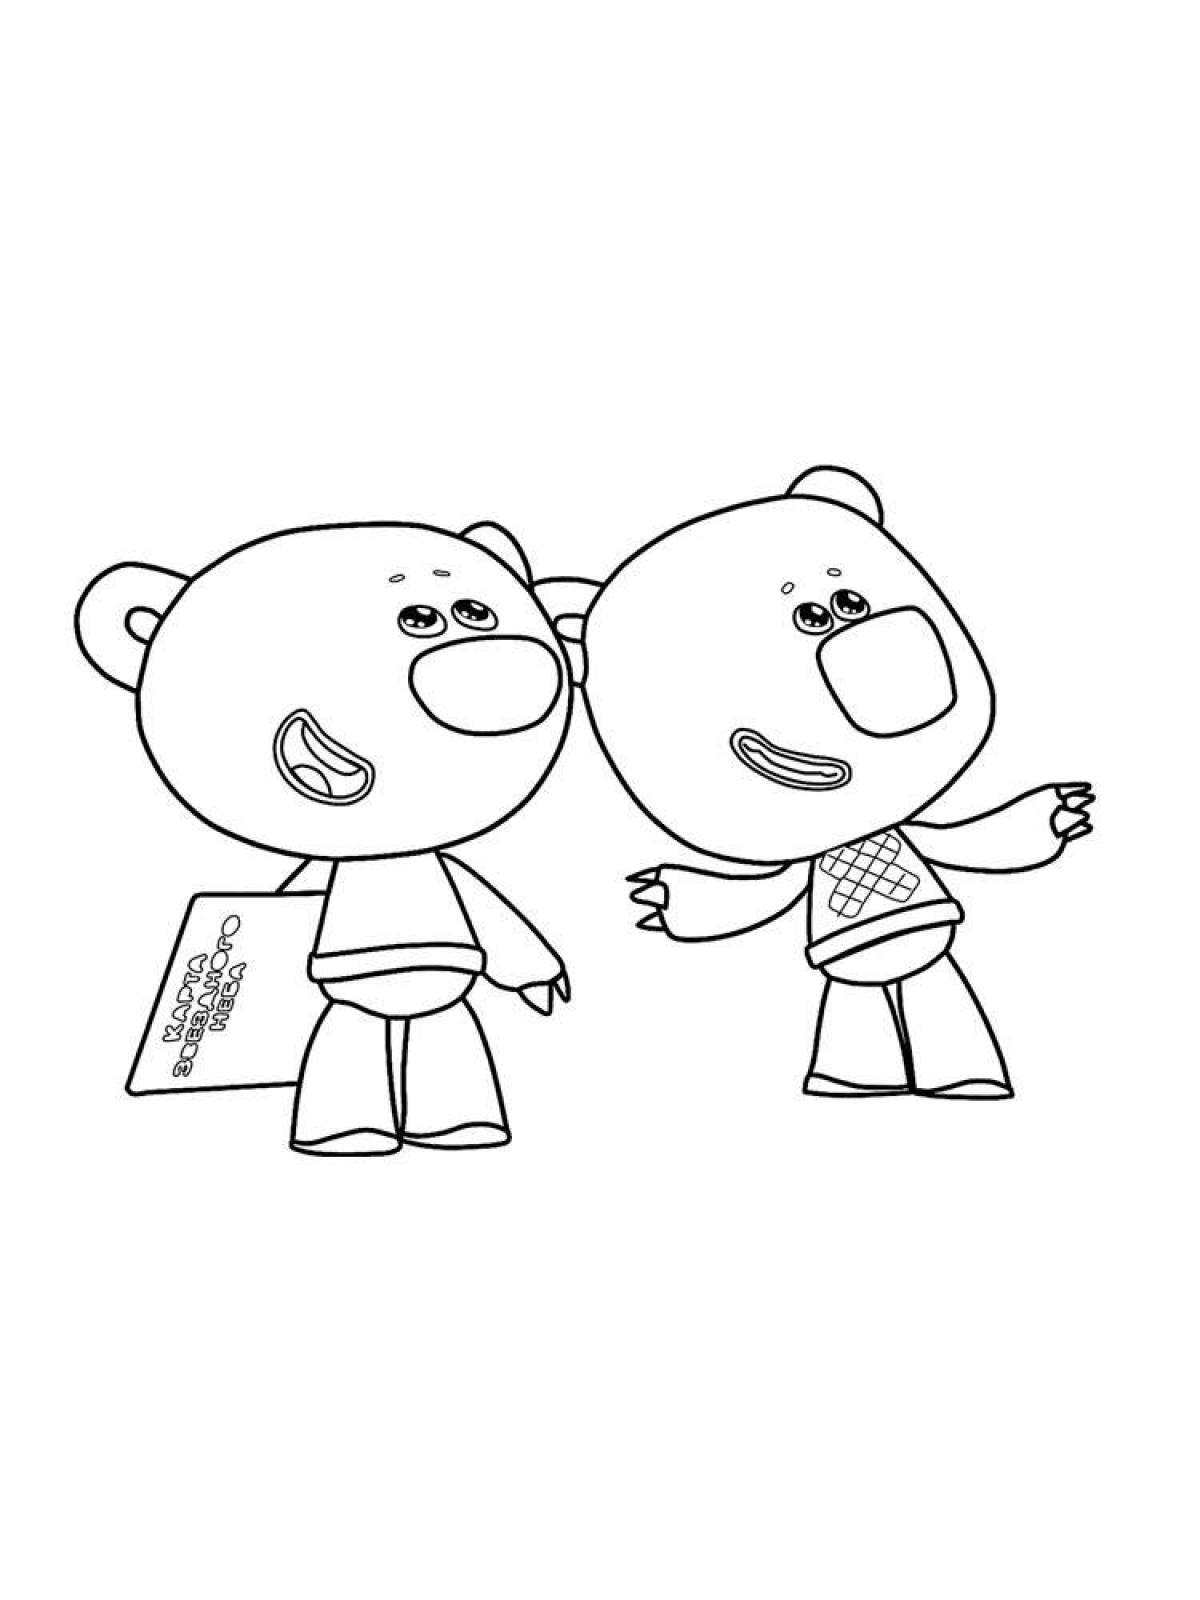 Animated bear coloring pages